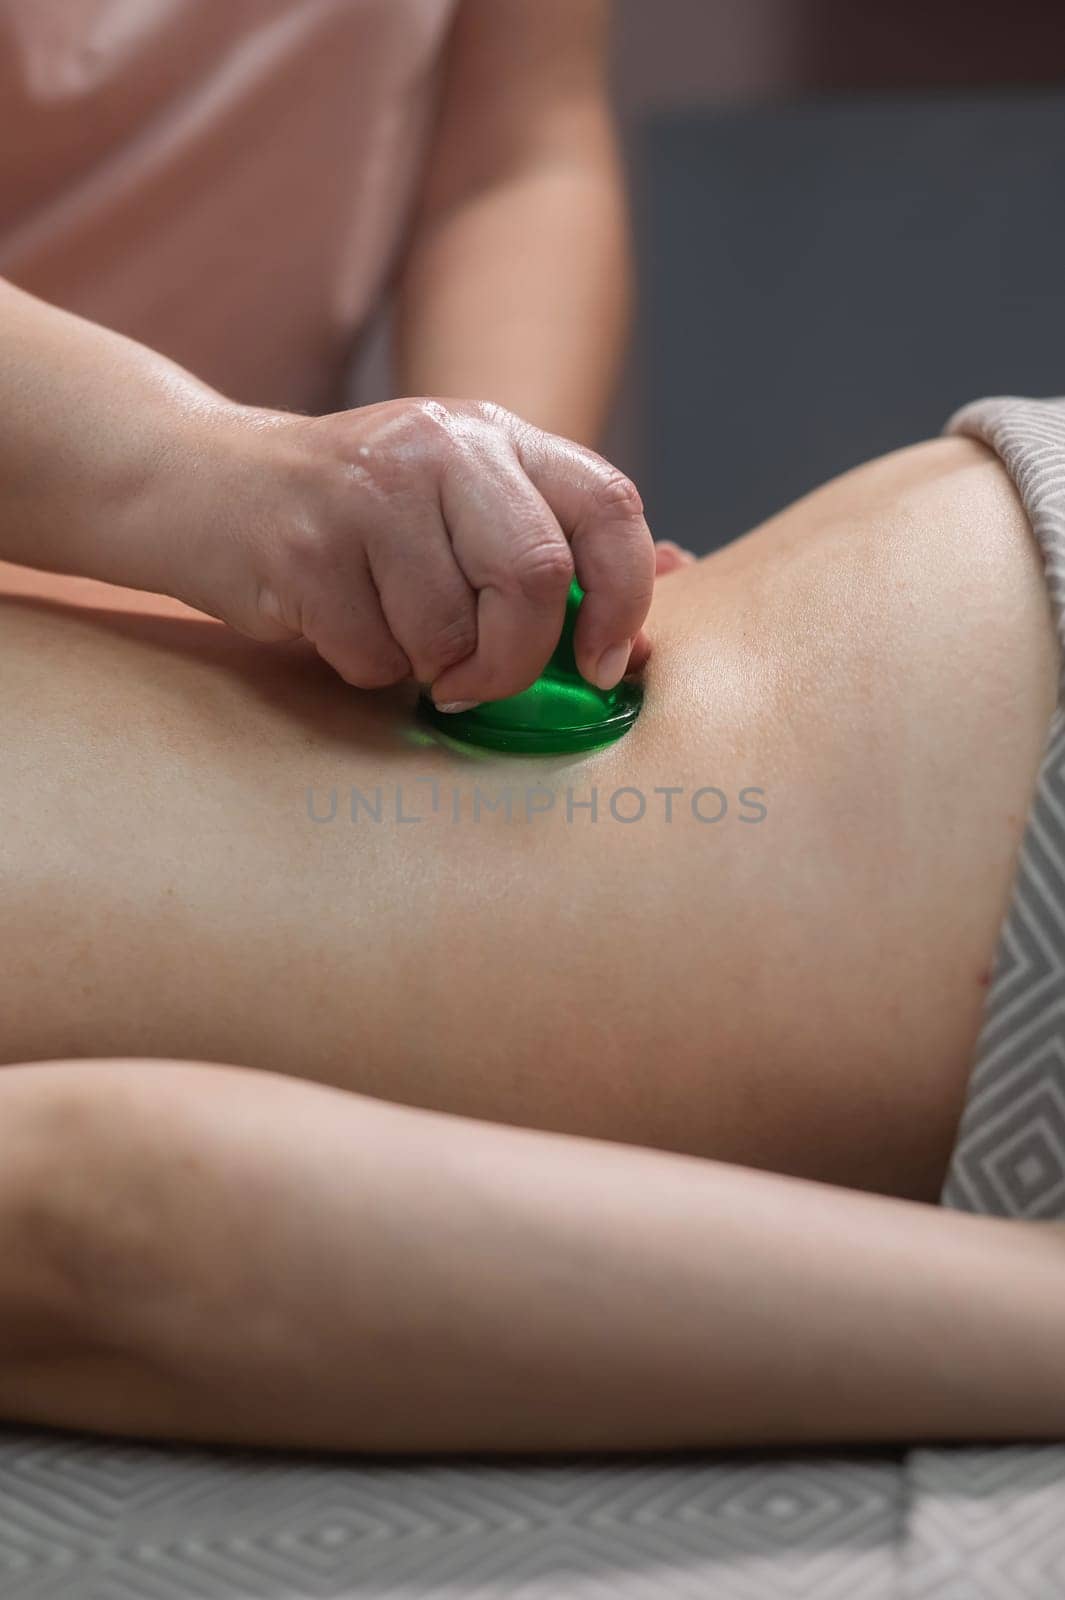 A woman undergoes an anti-cellulite massage procedure using a vacuum jar. Close-up of the lower back. Vertical photo. by mrwed54